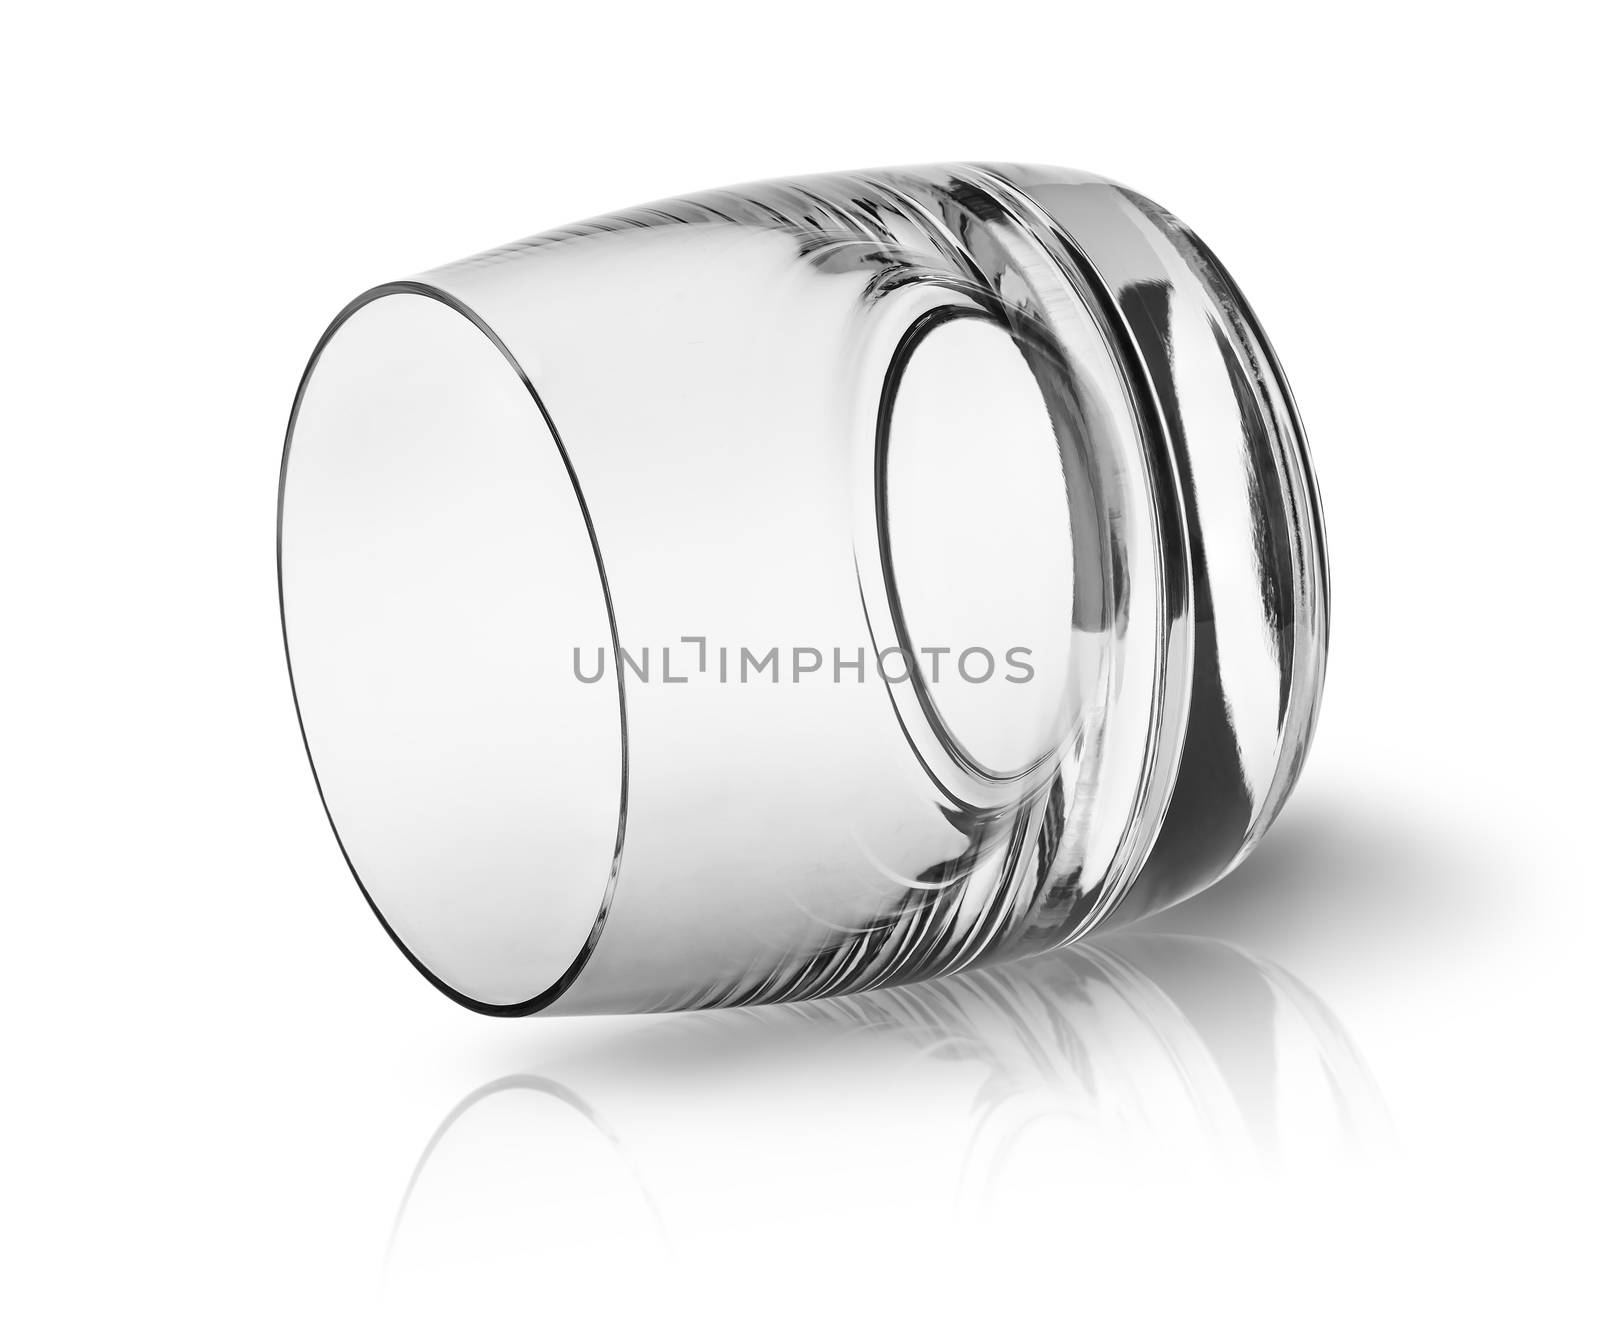 Small glass horizontally by Cipariss